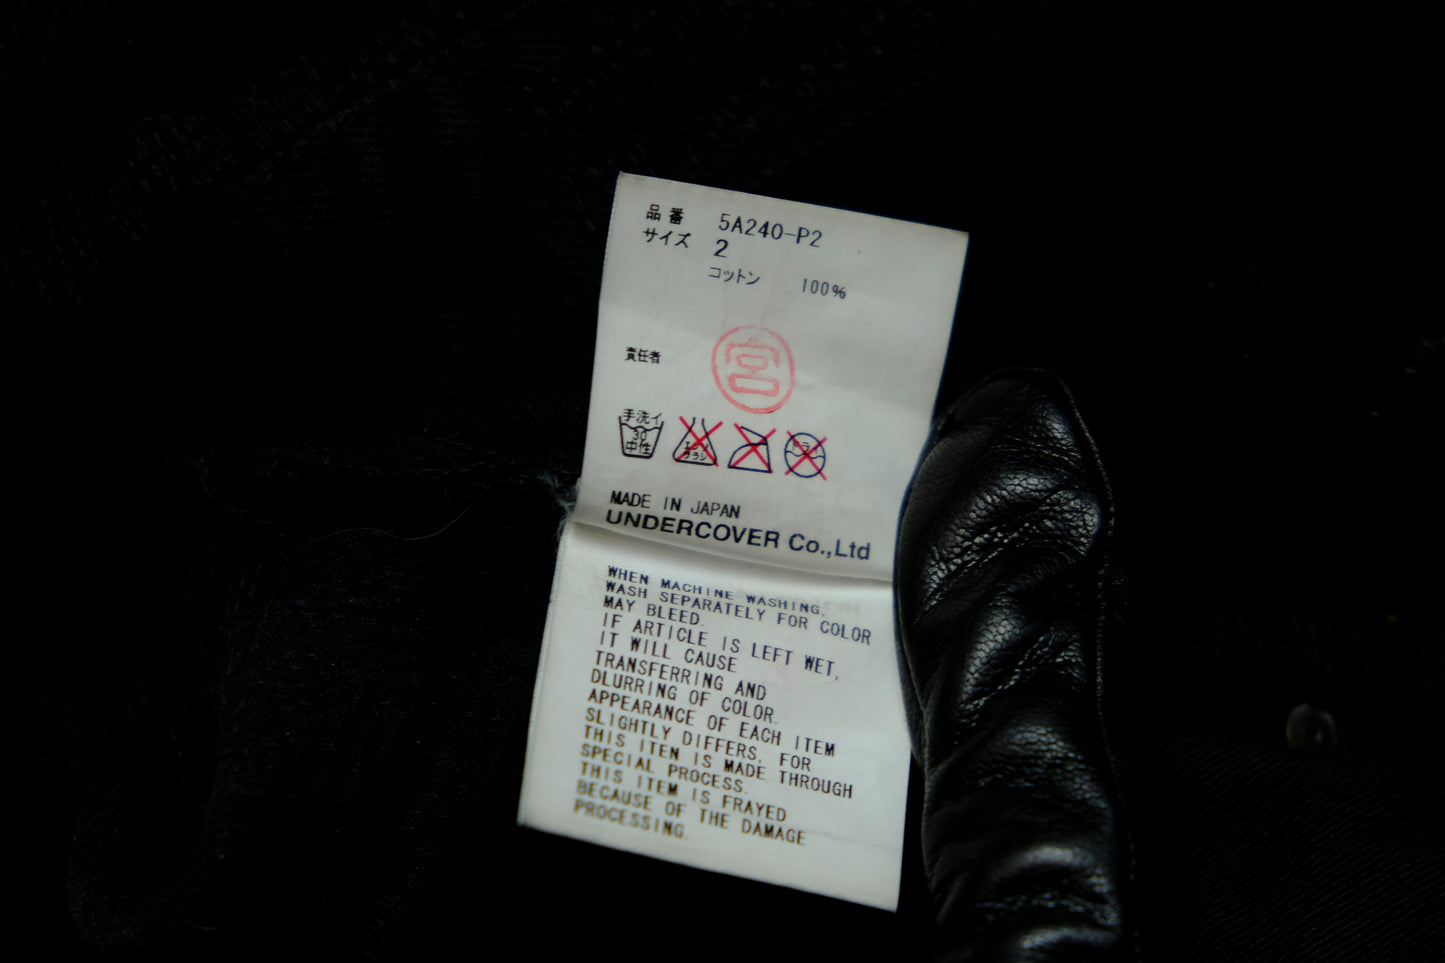 Undercover(ism) - AW05 "Arts and Crafts" 85 Denim Pants, JP 2